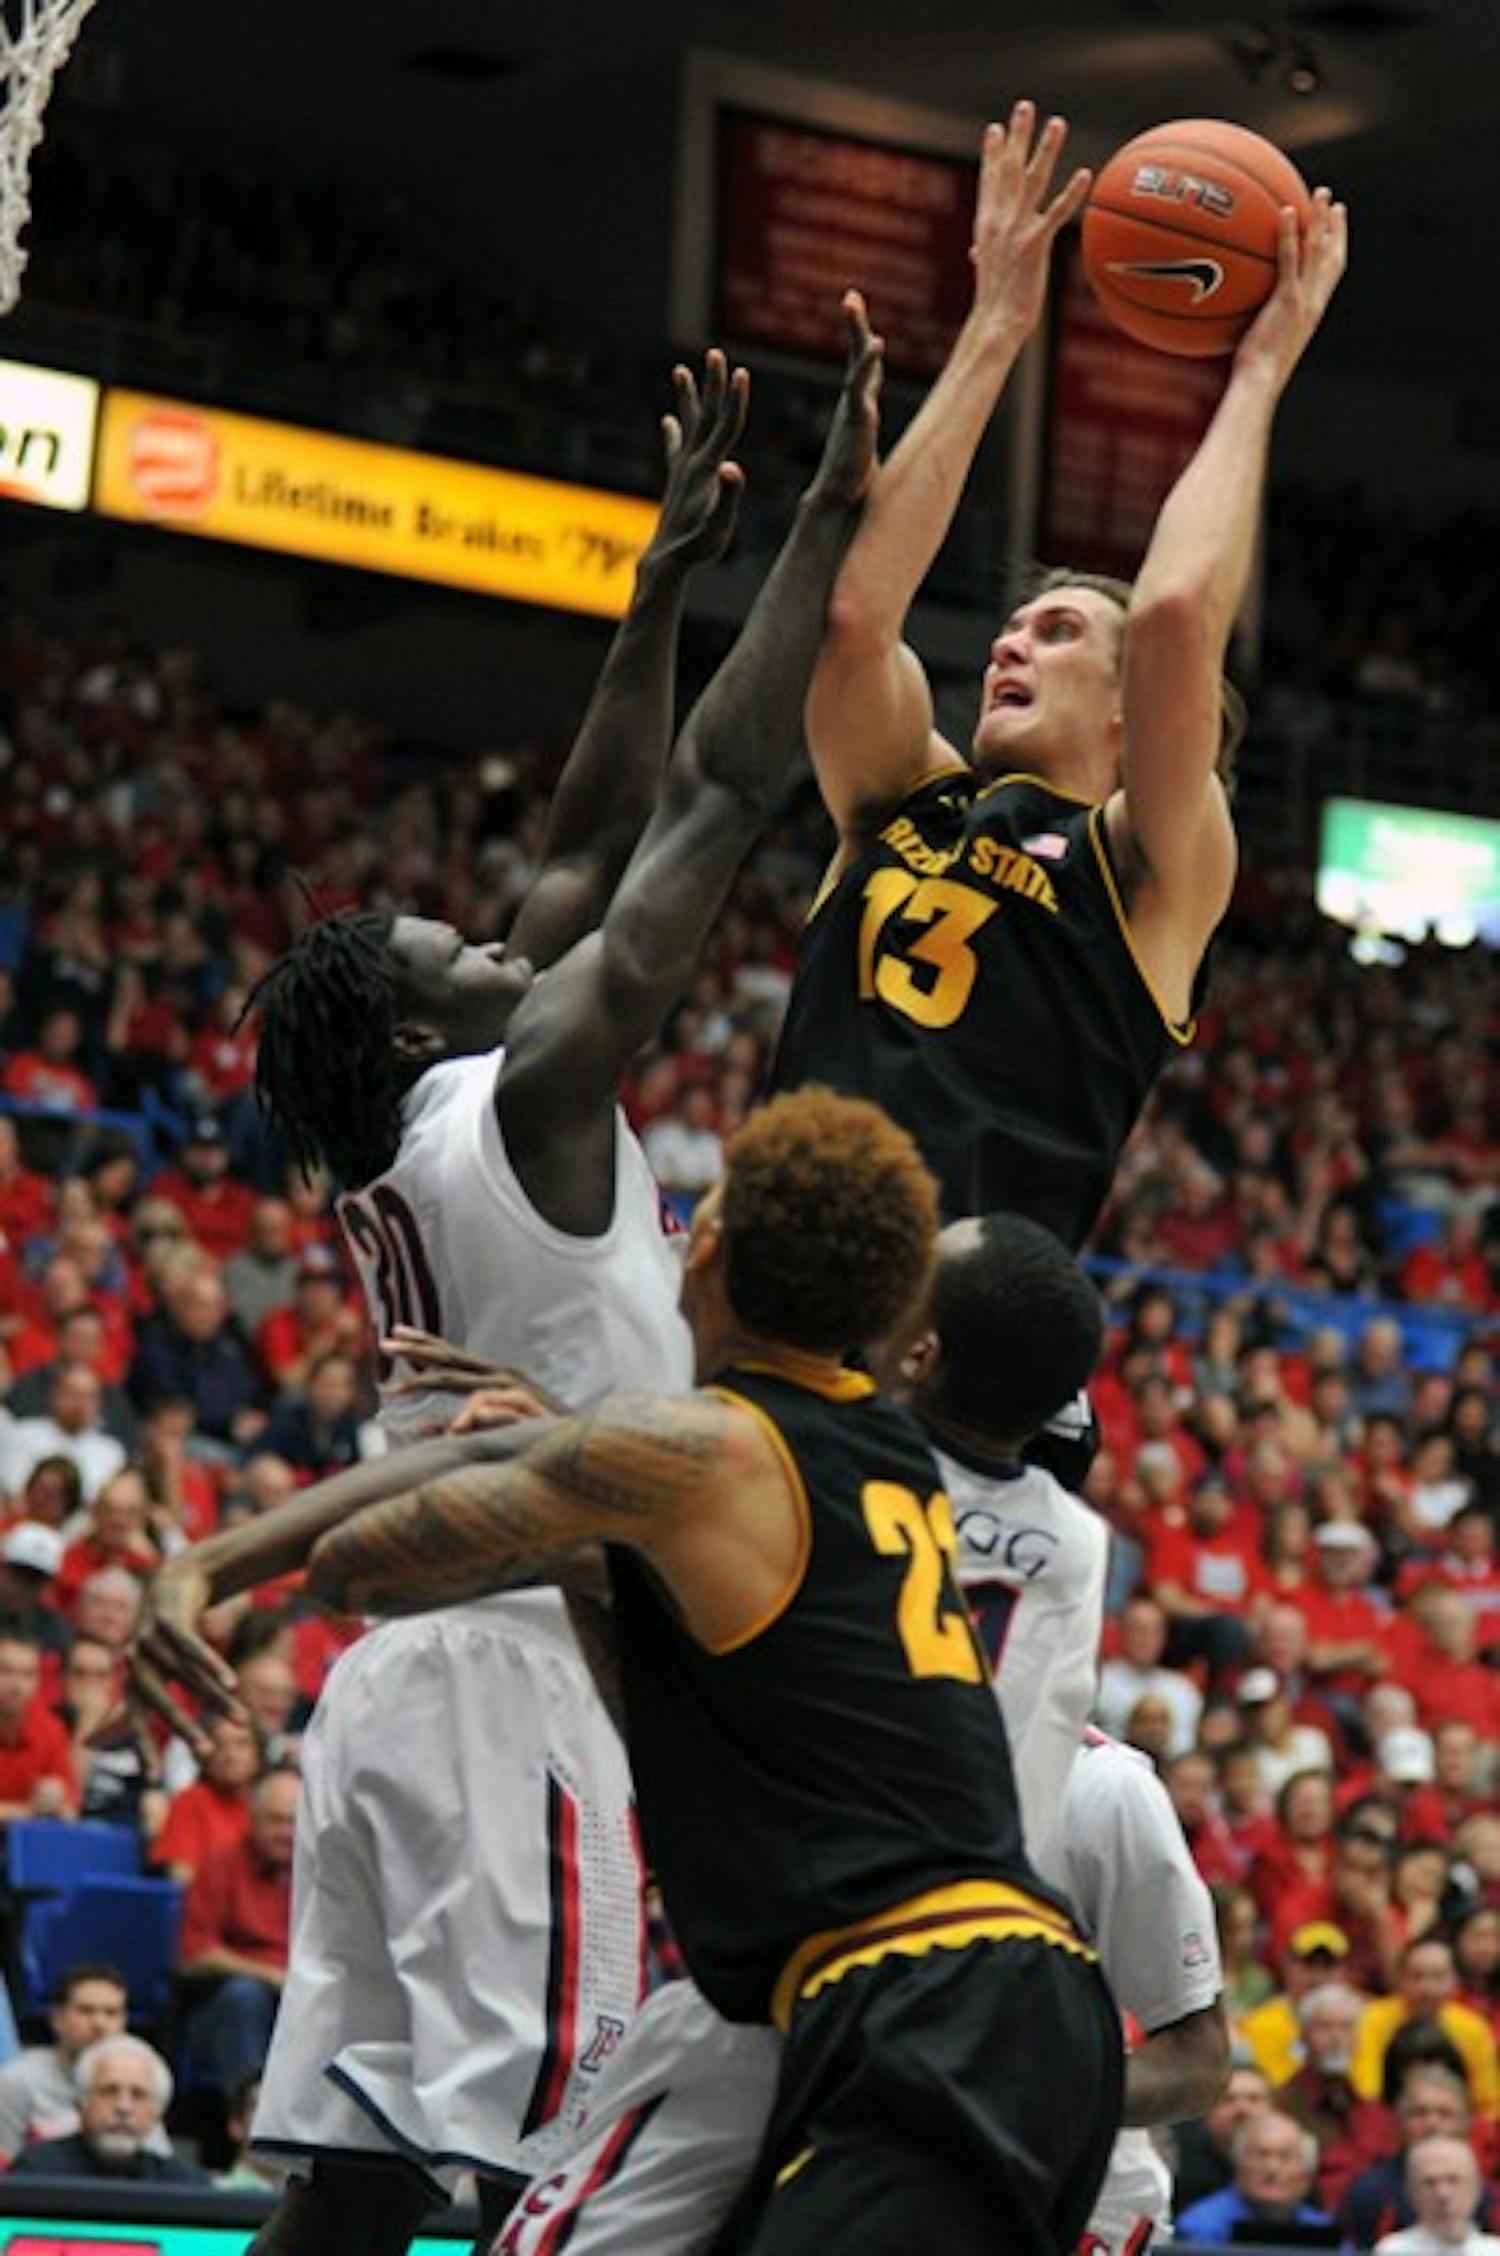 Jordan Bachynski shoots in traffic against UA on Dec. 31, 2011. Bachynski finished the game with 10 points, seven rebounds and four blocks as the Sun Devils lost to the Utes 64–43 on Saturday. (Photo by Aaron Lavinsky)